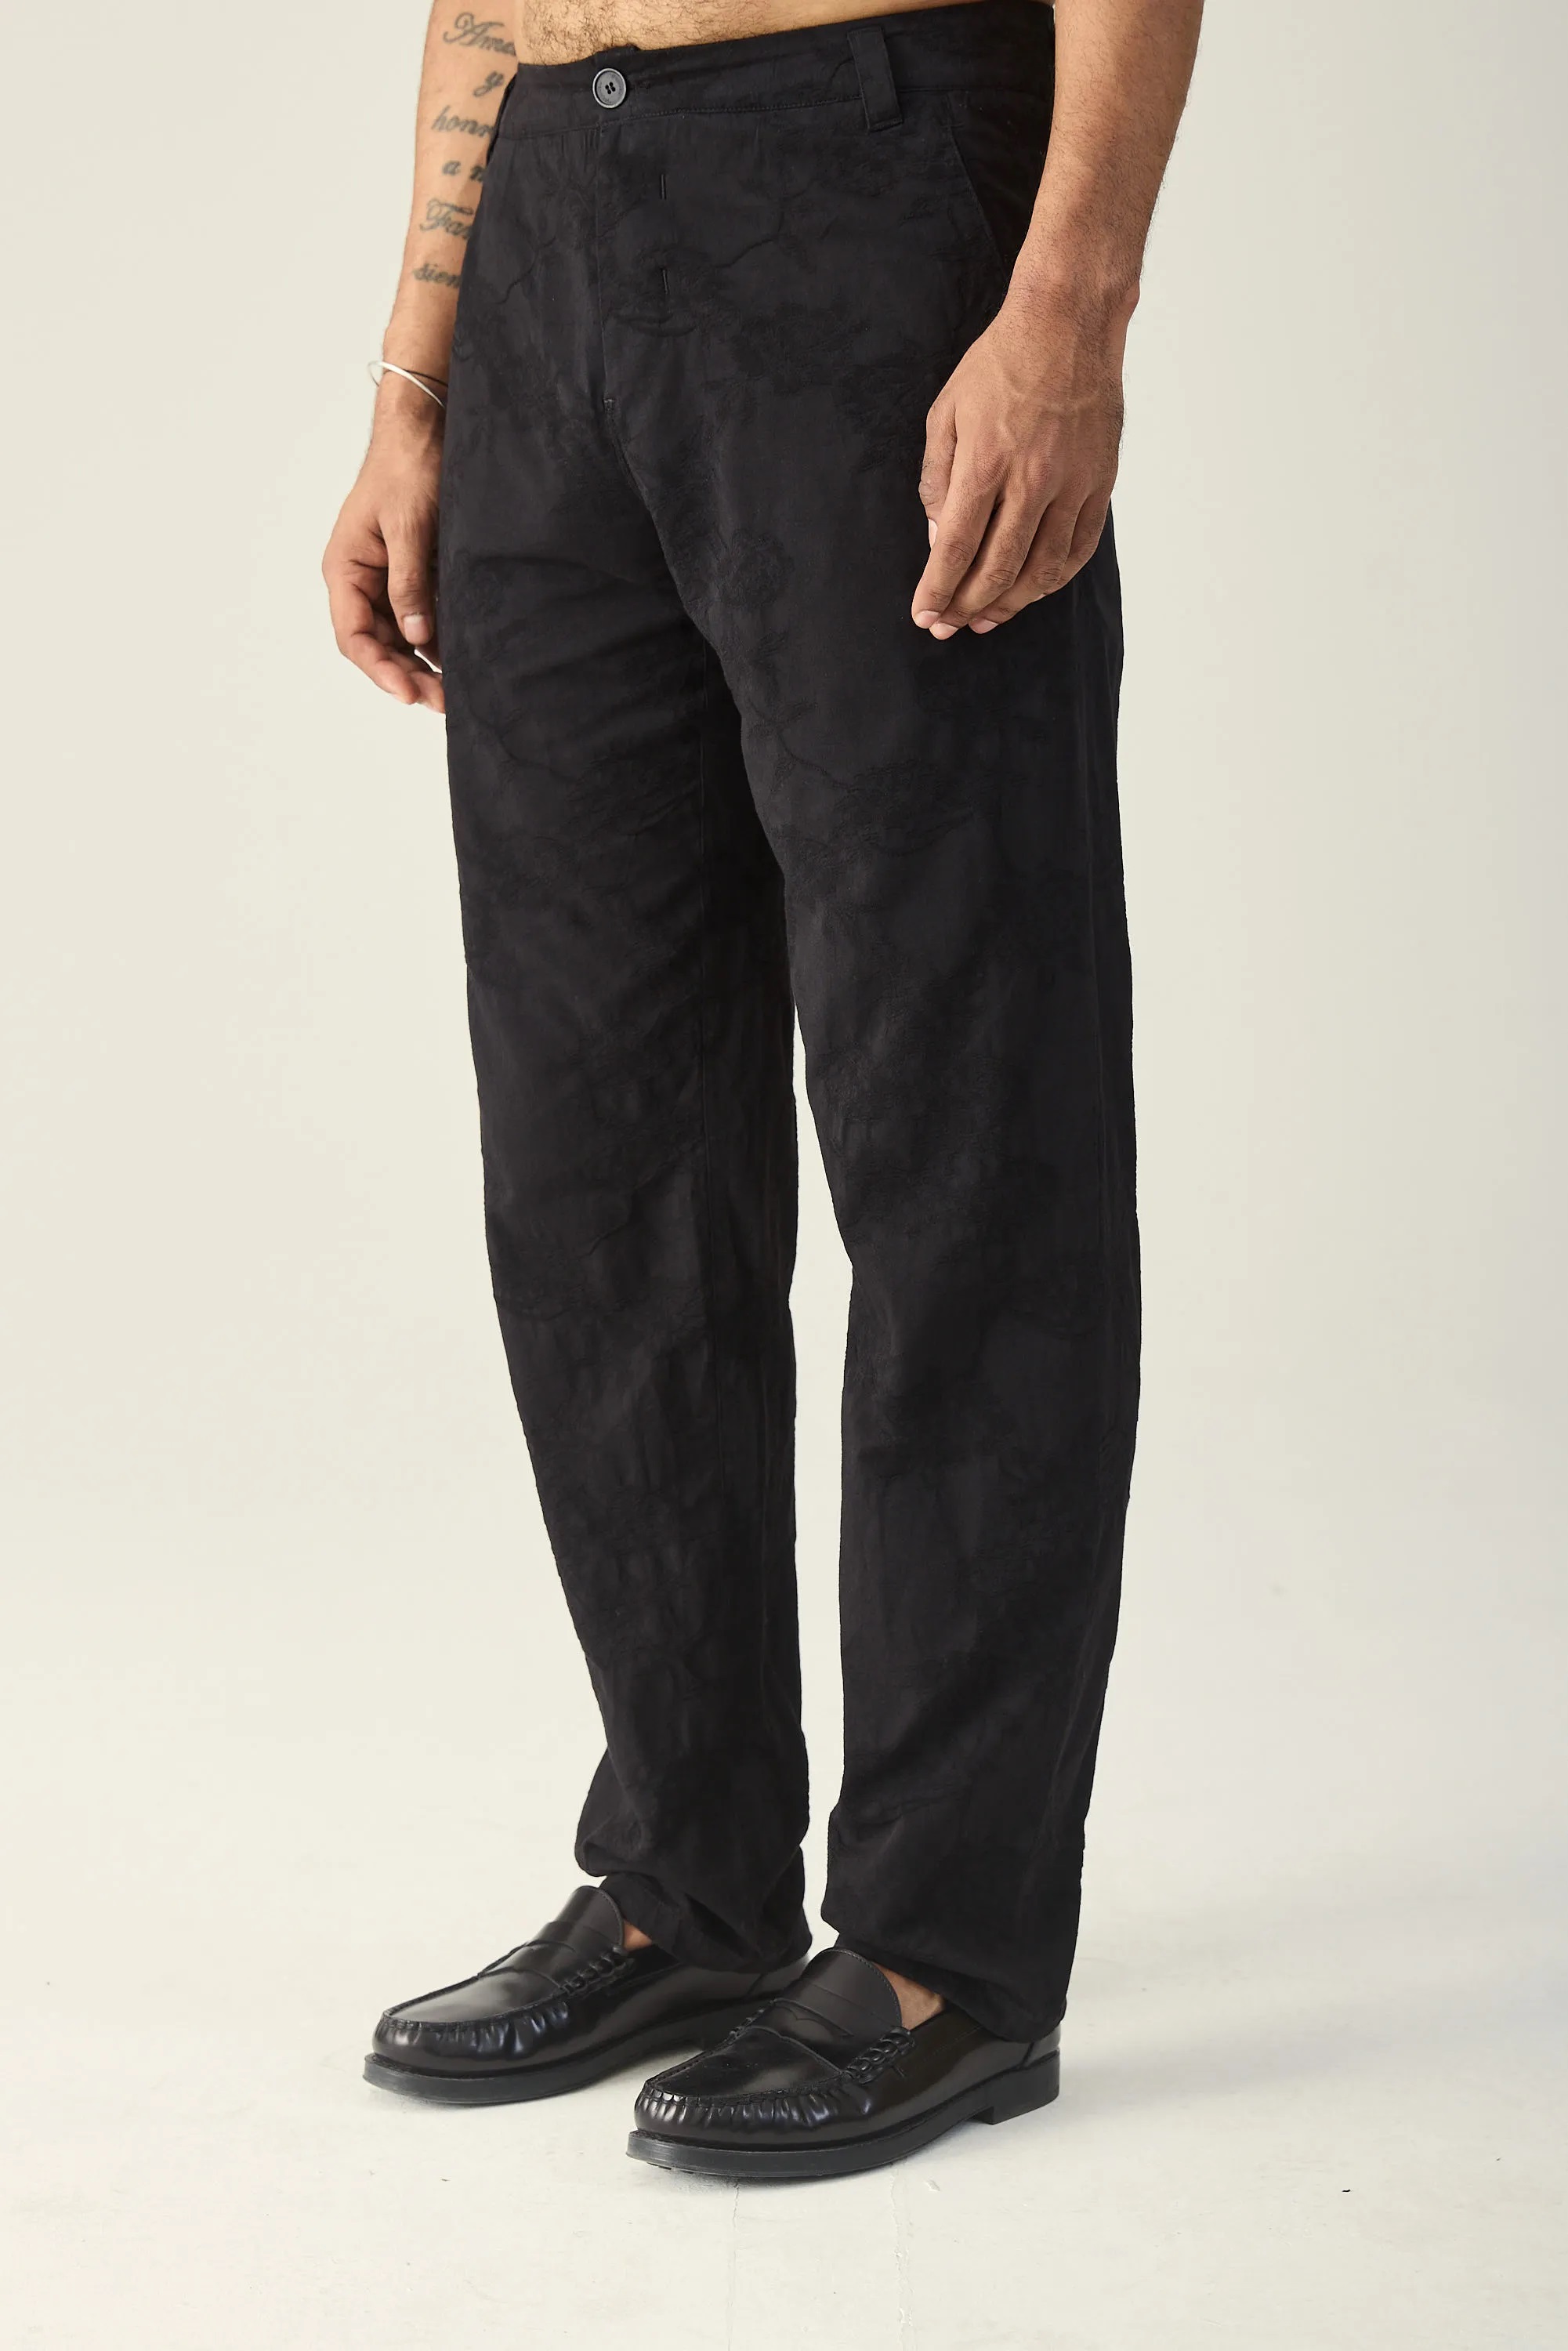 HANNIBAL. Embroidered Trouser Hannes in Black 46